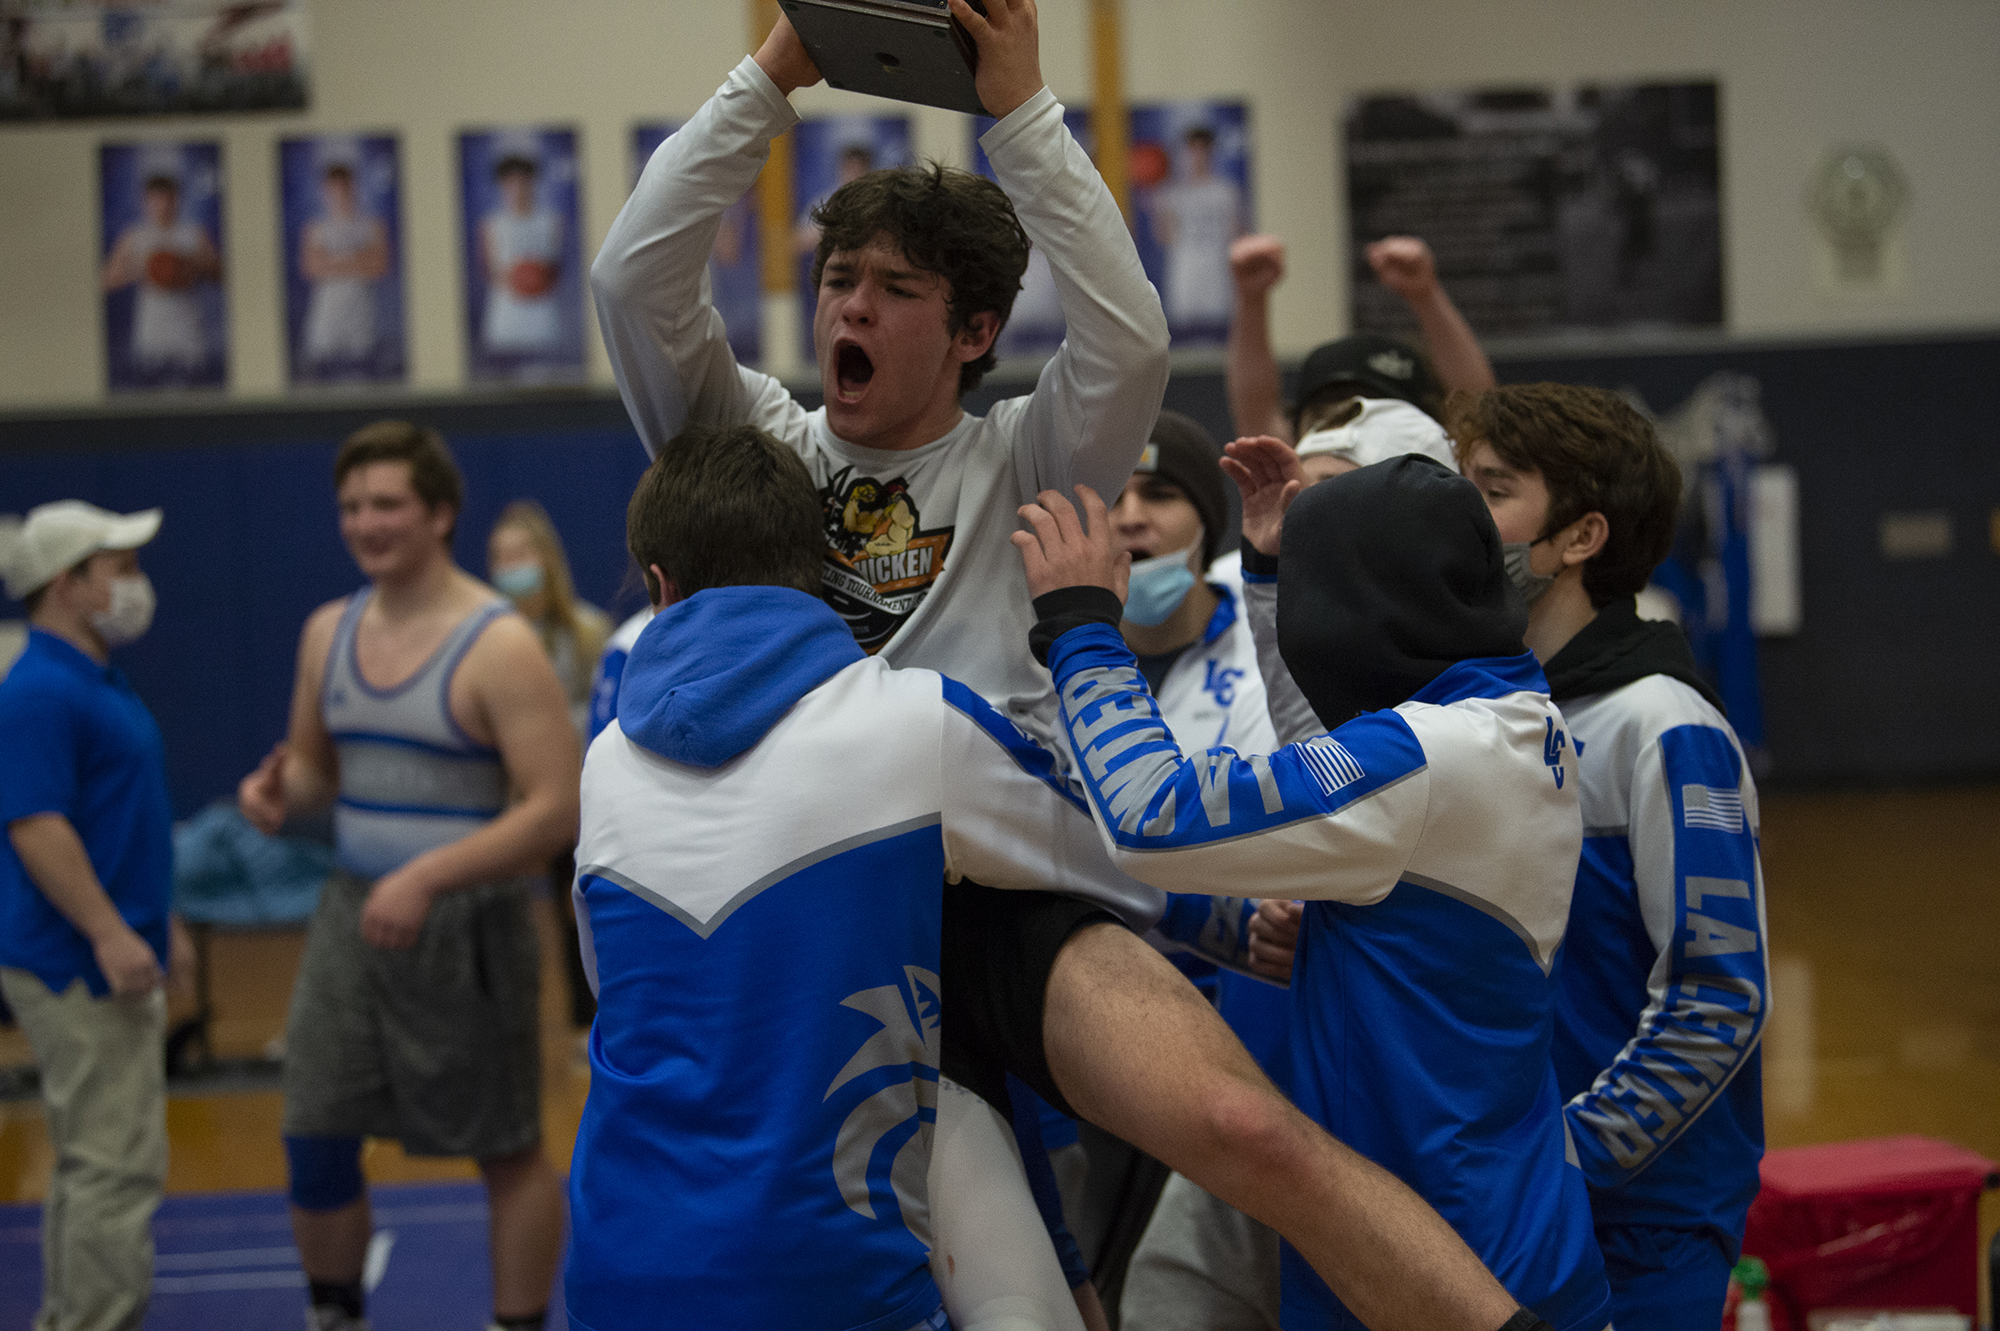 La Center's Austin Mattson is hoisted by his teammate as he holds the SpudCat Trophy, awarded to the winner of  the Ridgefield-La Center wrestling match. La Center beat Ridgefield 35-30 on Thursday night La Center on a pin by Leah Wallway at 106 pounds.